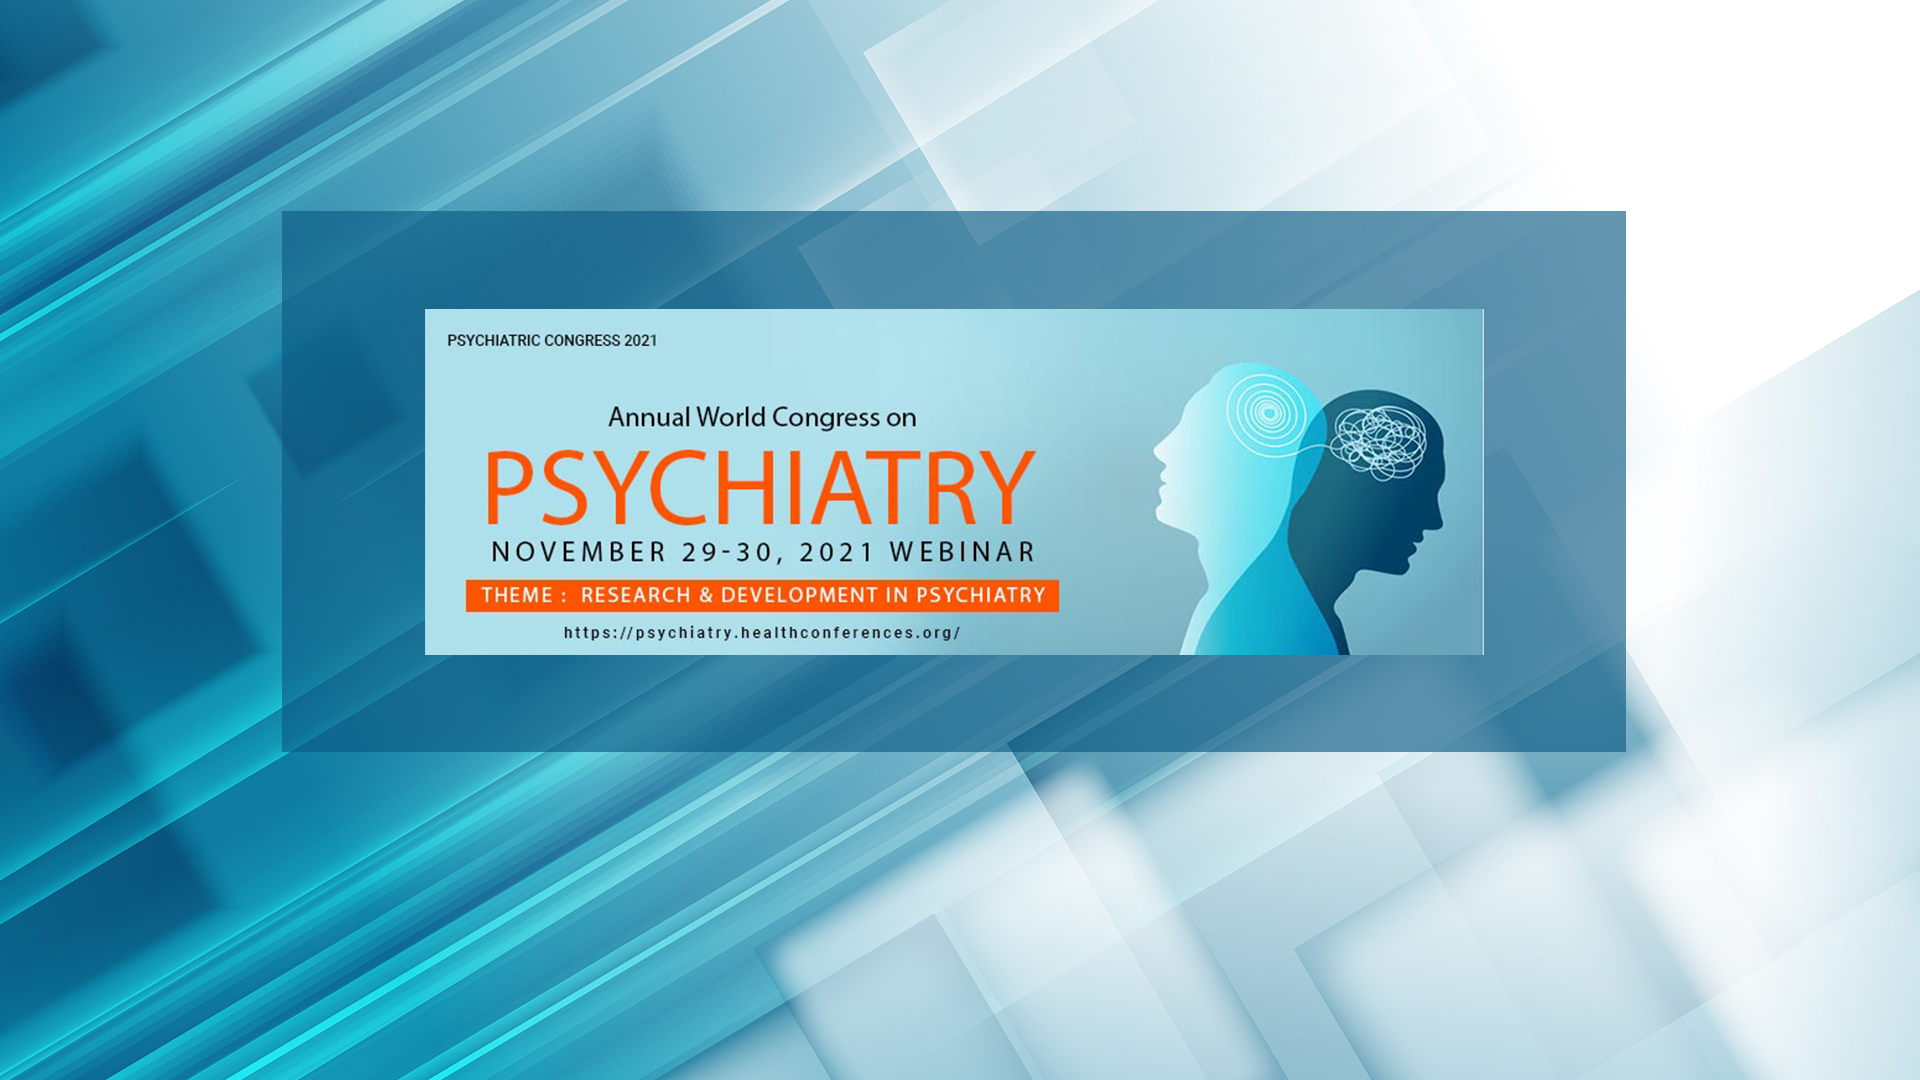 IASGA at the Annual World Congress of Psychiatry